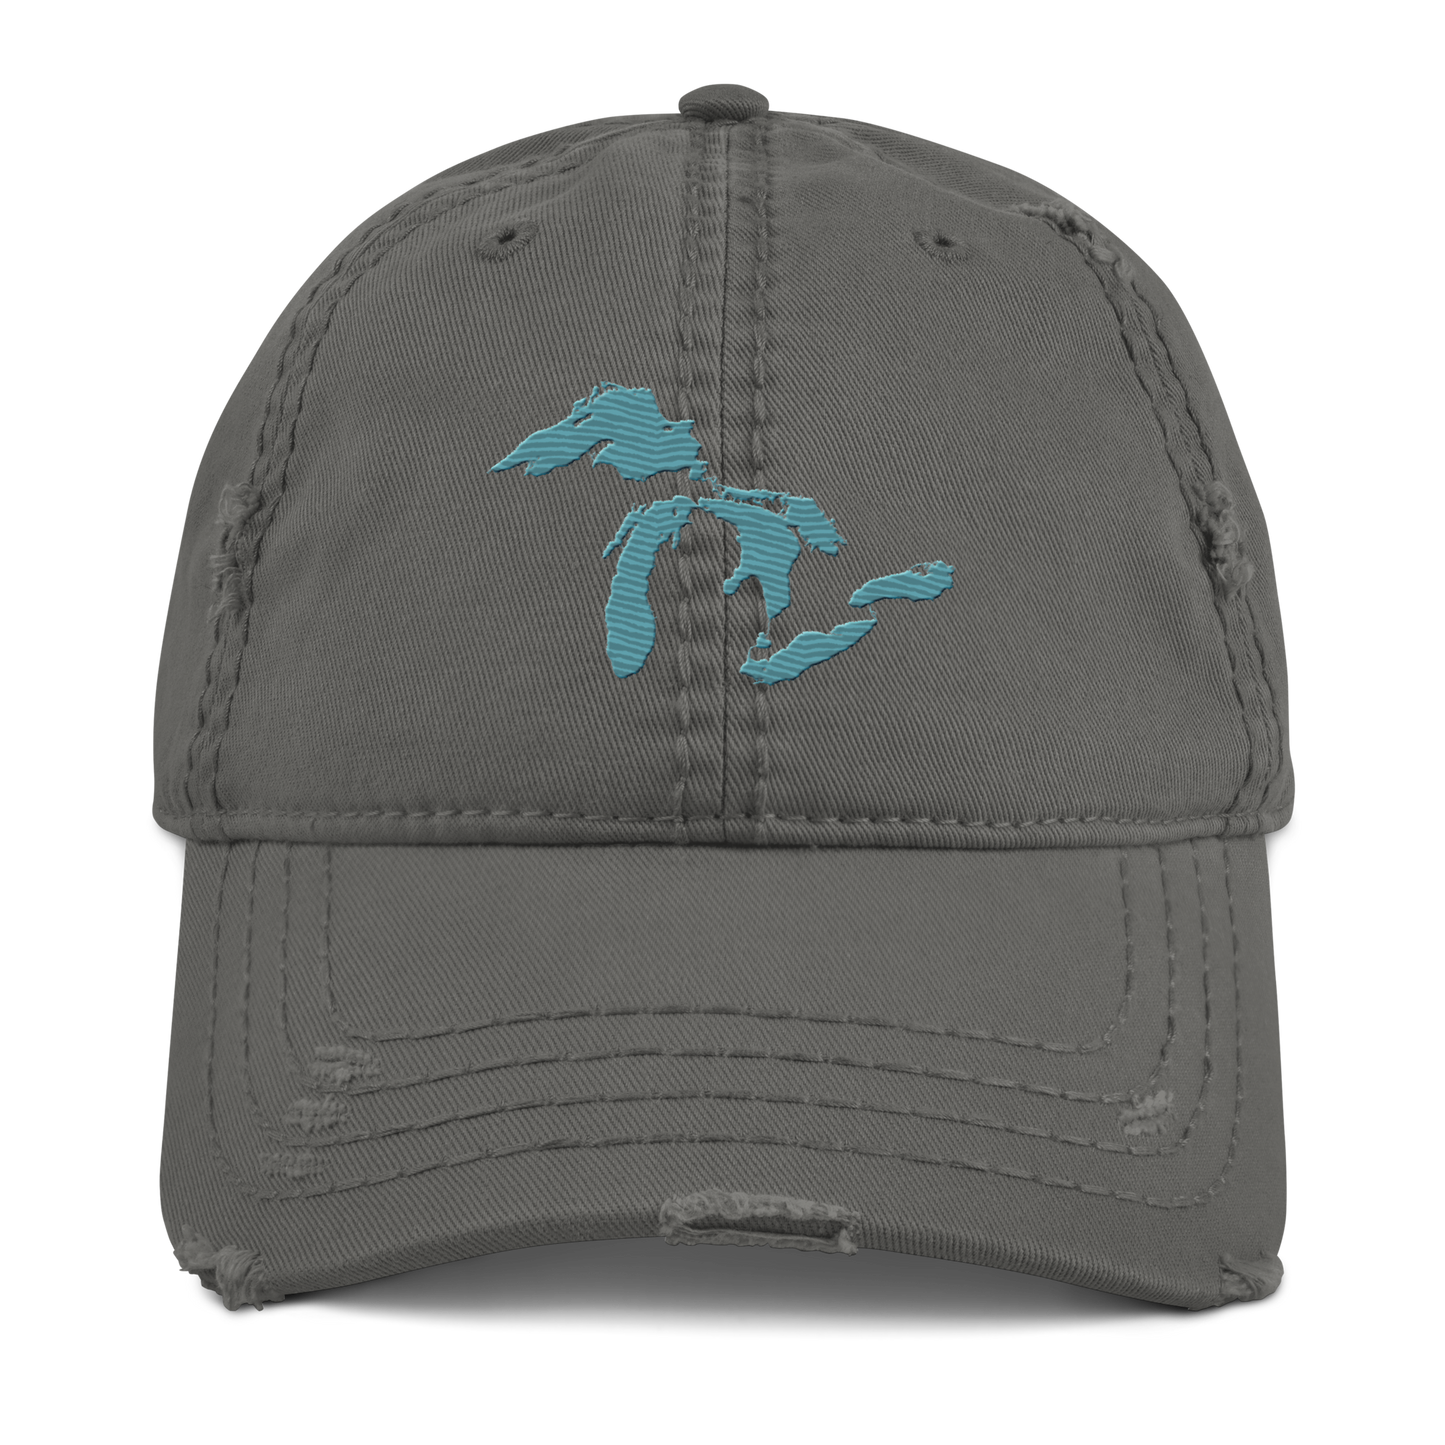 Great Lakes Distressed Dad Hat (Huron Blue)